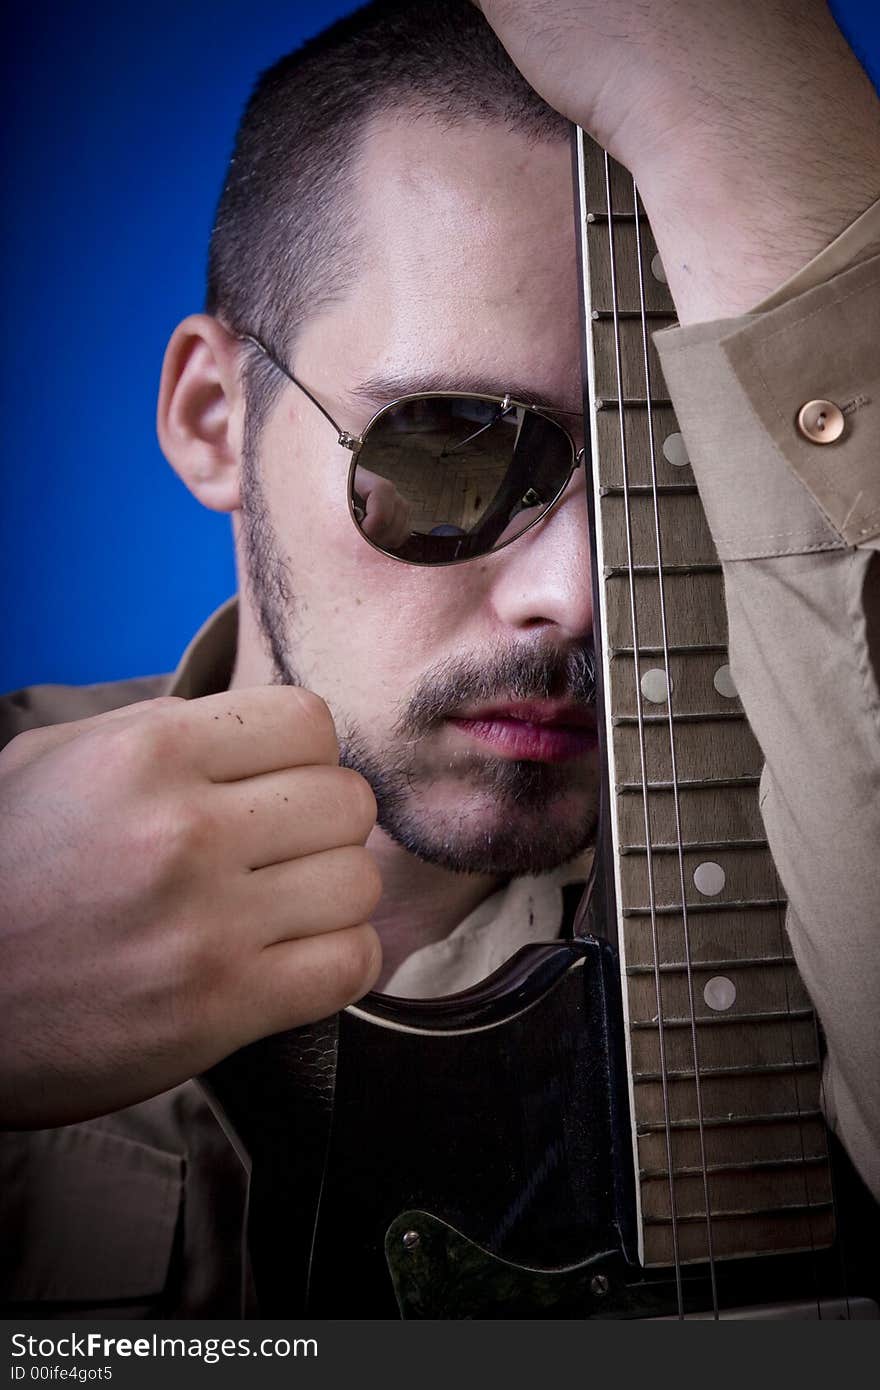 Guitar player with sunglasses in studio, leaning his head against the fretboard of his guitar, facing the camera. Guitar player with sunglasses in studio, leaning his head against the fretboard of his guitar, facing the camera.